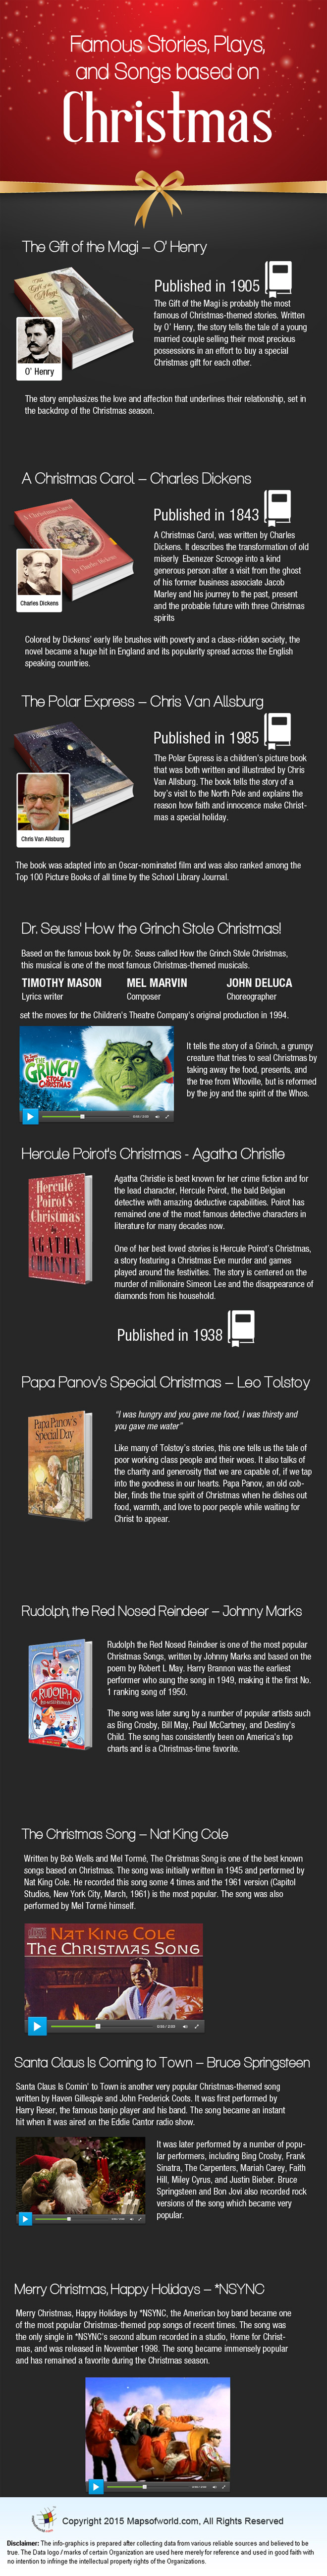 infographics on Famous Stories, Plays, and Songs Based on Christmas